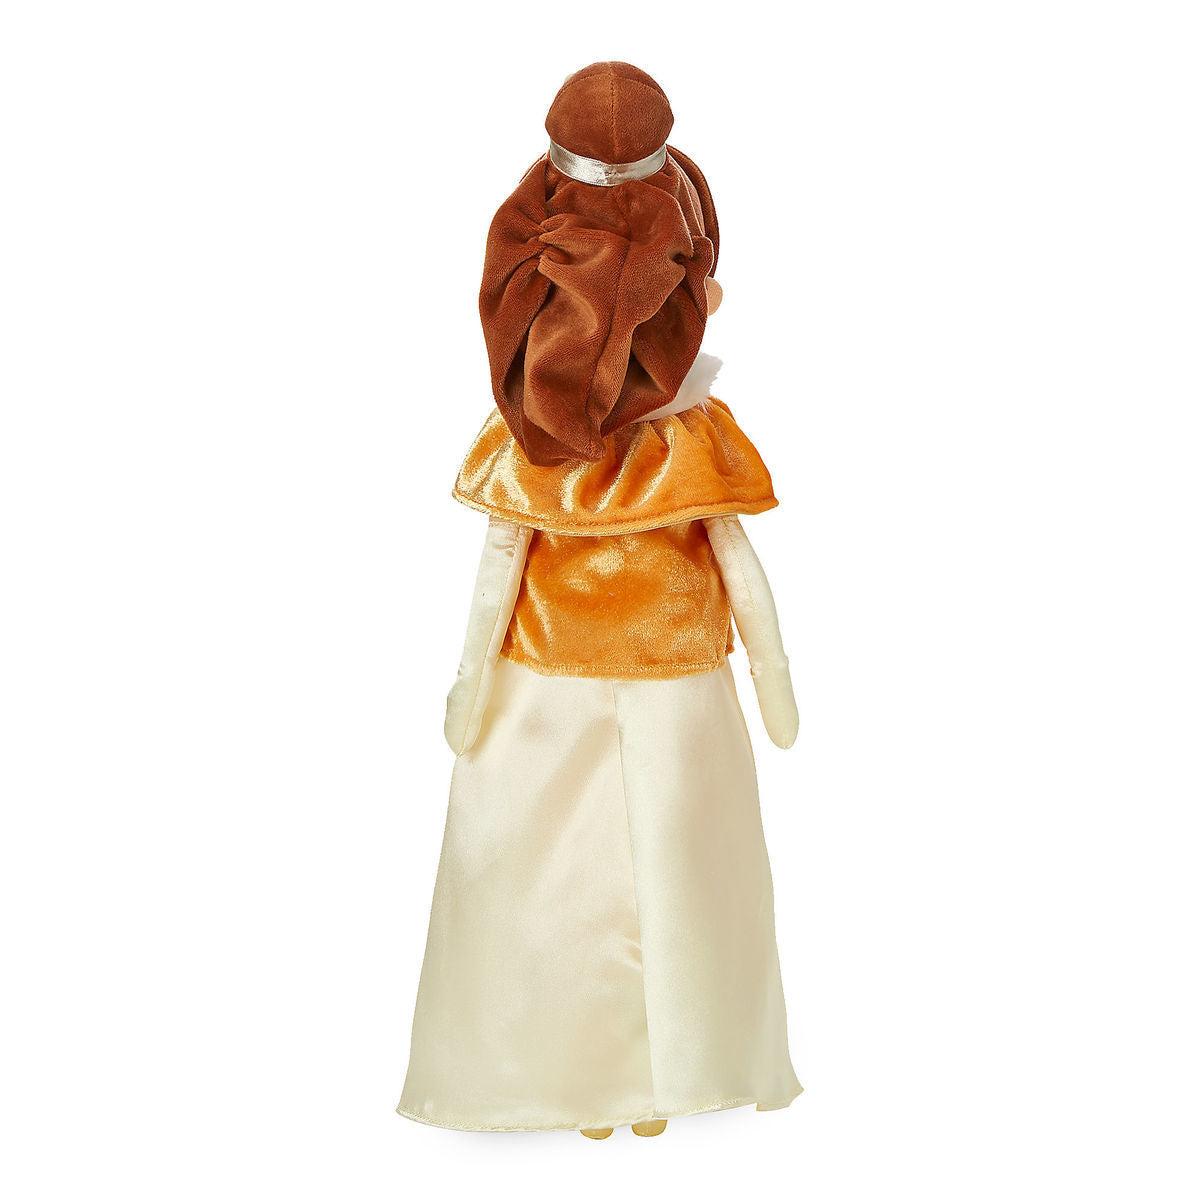 Disney Belle Plush Doll in Winter Cape Medium New with Tags